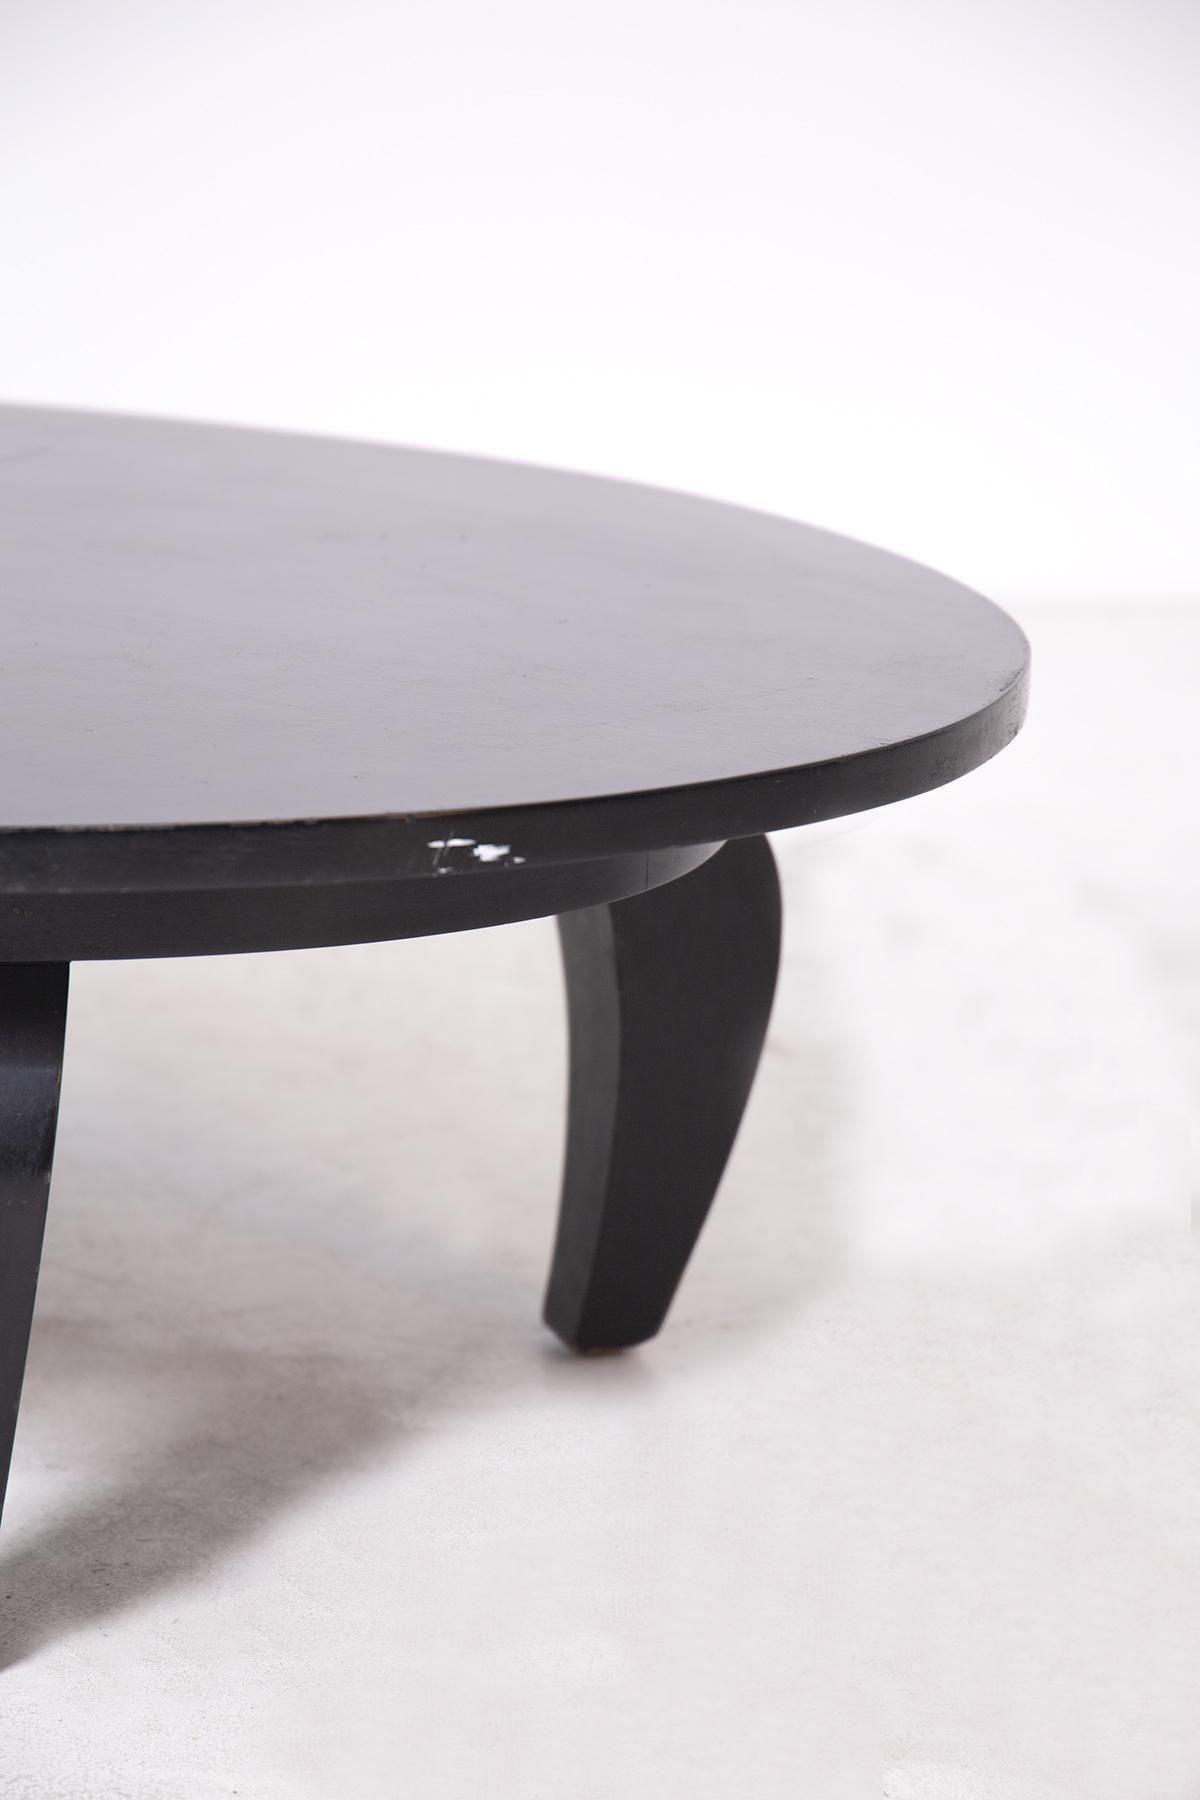 Mid-20th Century American Coffee Table in Black Wood, 1950s For Sale